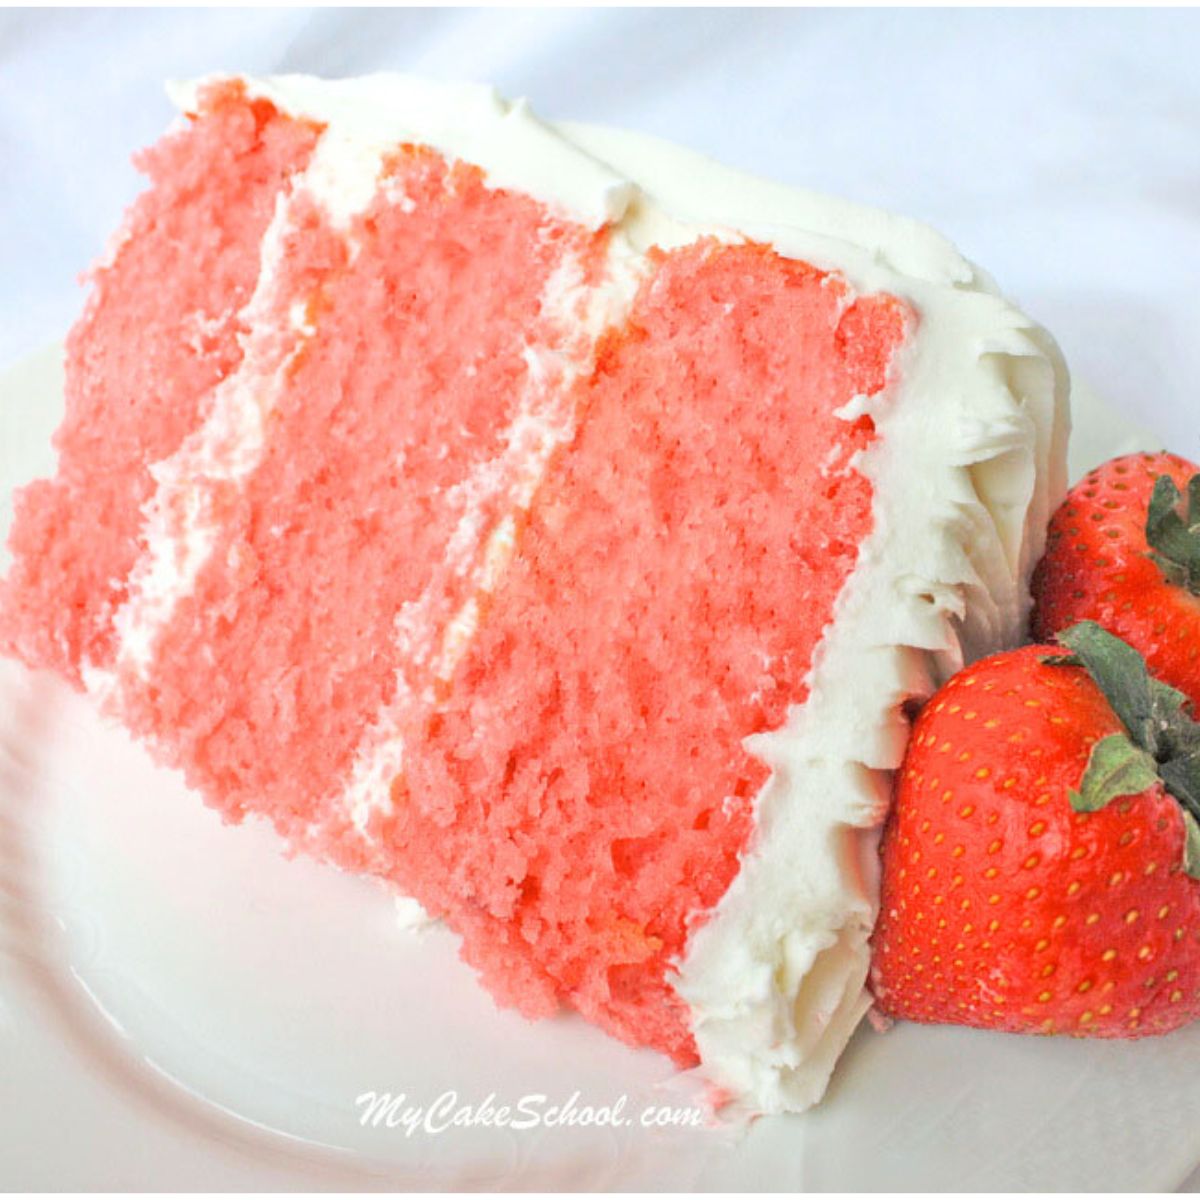 Slice of three layer strawberry cake from cake mix on a plate, next to two fresh strawberries.